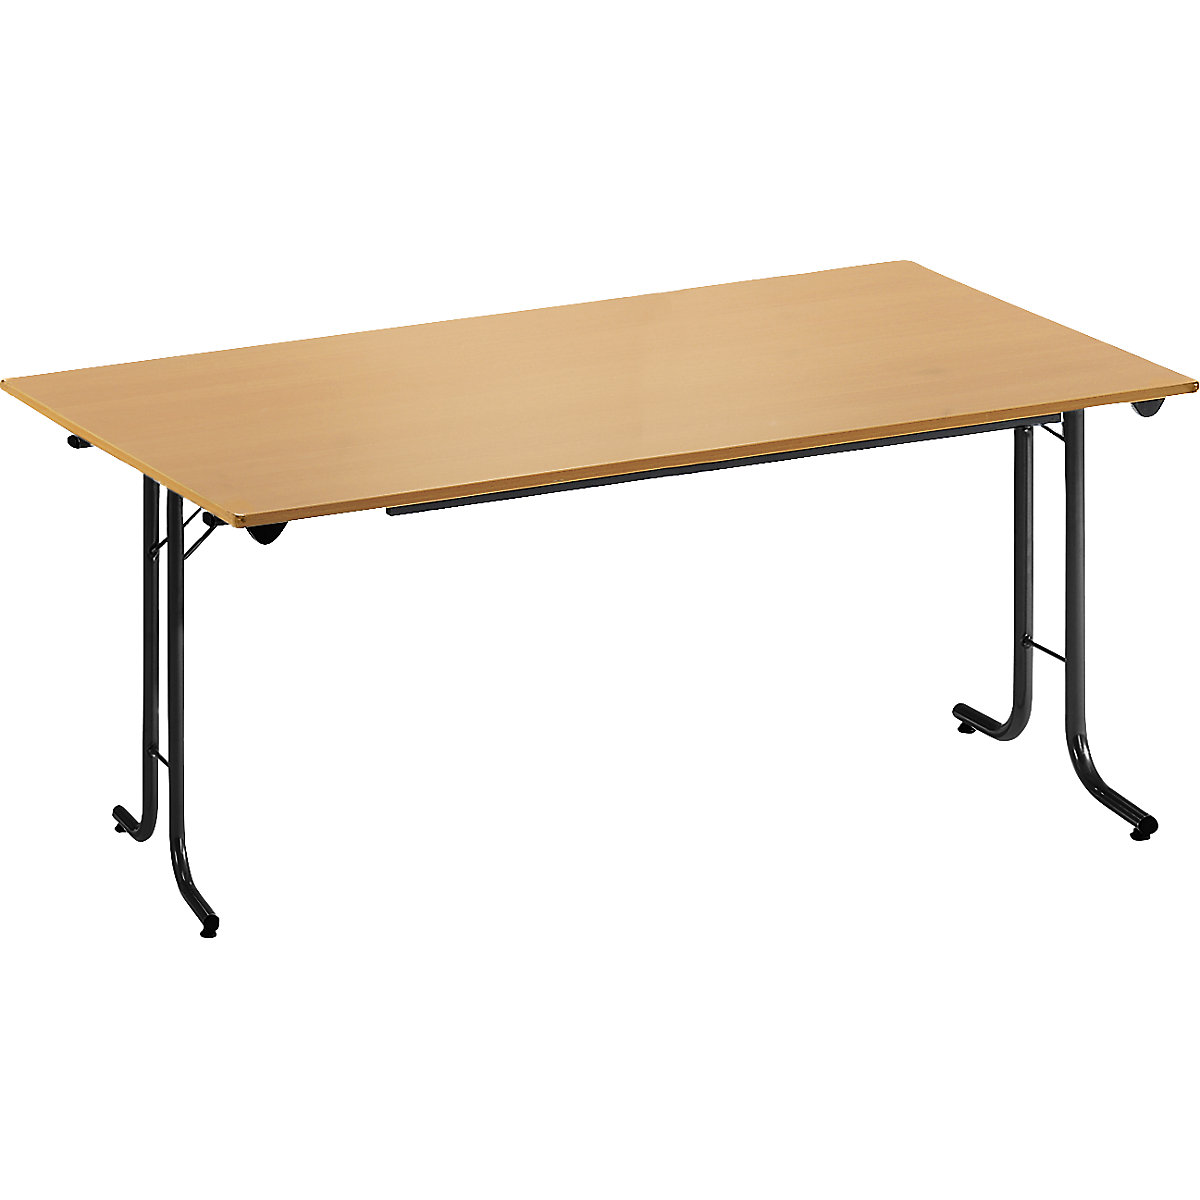 Folding table, with rounded edges, round tubular frame, rectangular top, 1400 x 700 mm, black frame, beech finish tabletop-15